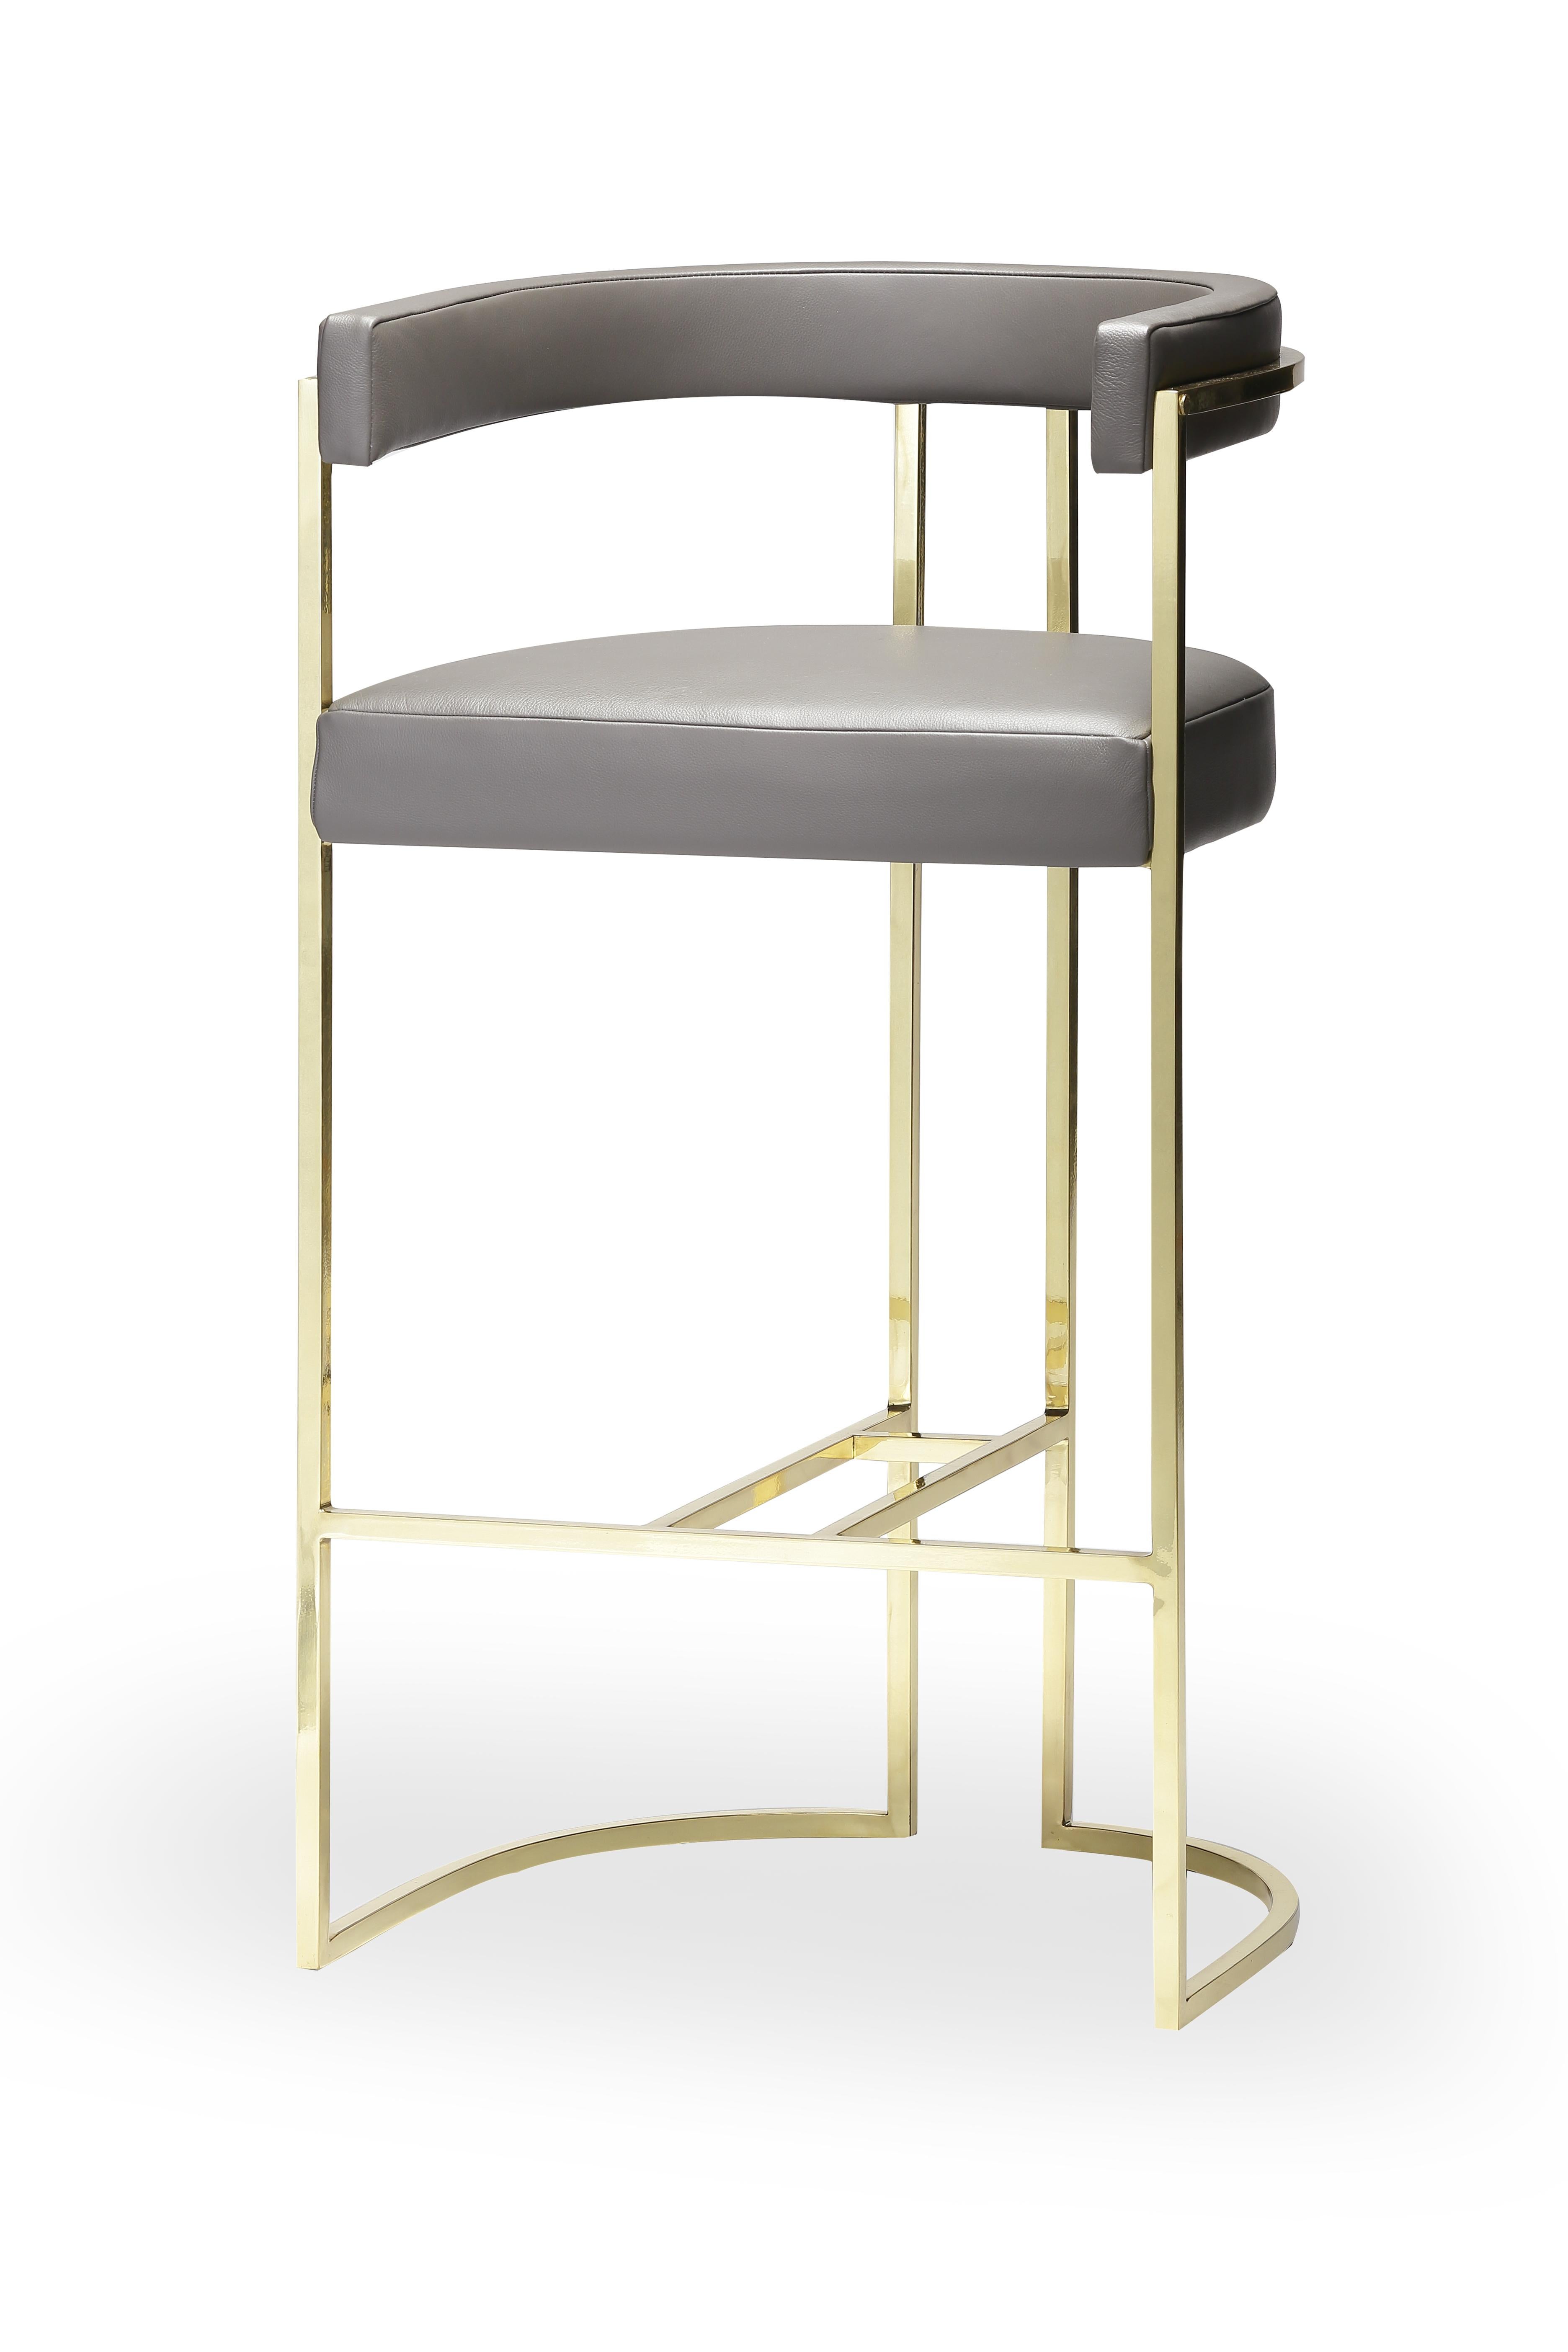 Brass Julius Bar Stool by Duistt
Dimensions: W 55 x D 46 x H 101 cm
Materials: Leather and Brass

The JULIUS bar stool, crafted with great attention to detail, gives us clean and modern lines always with a strong craftsmanship presence like the